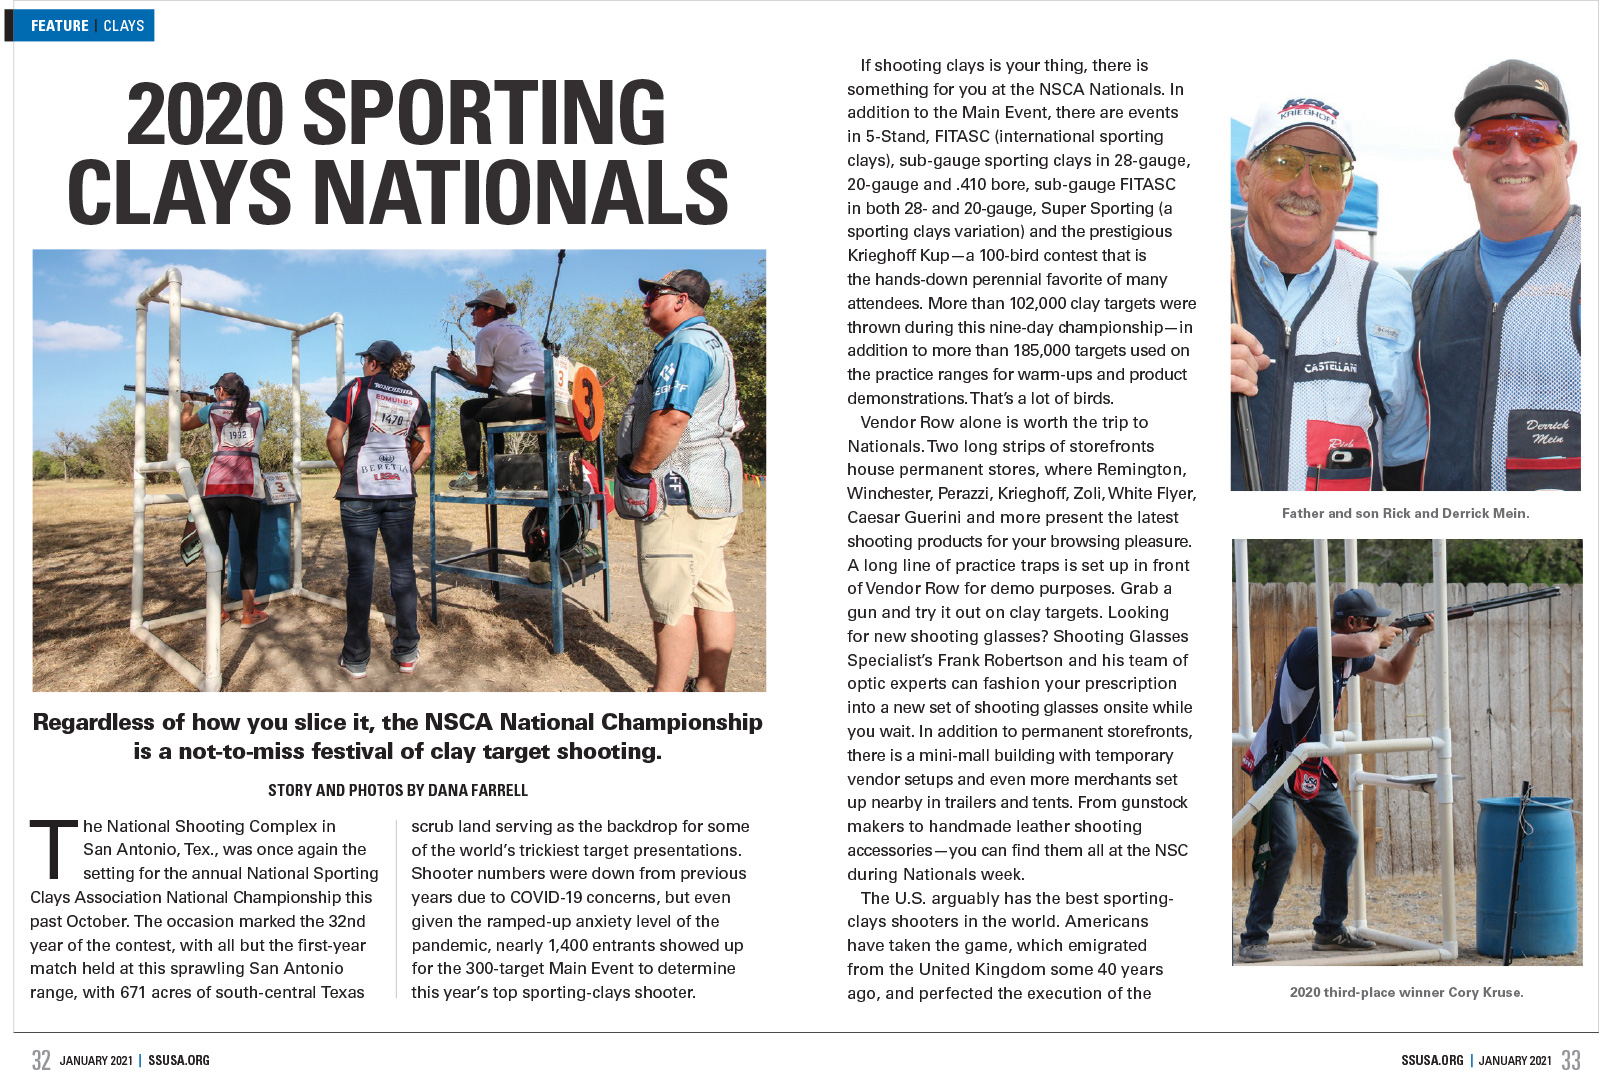 2020 National Sporting Clays Association National Championship